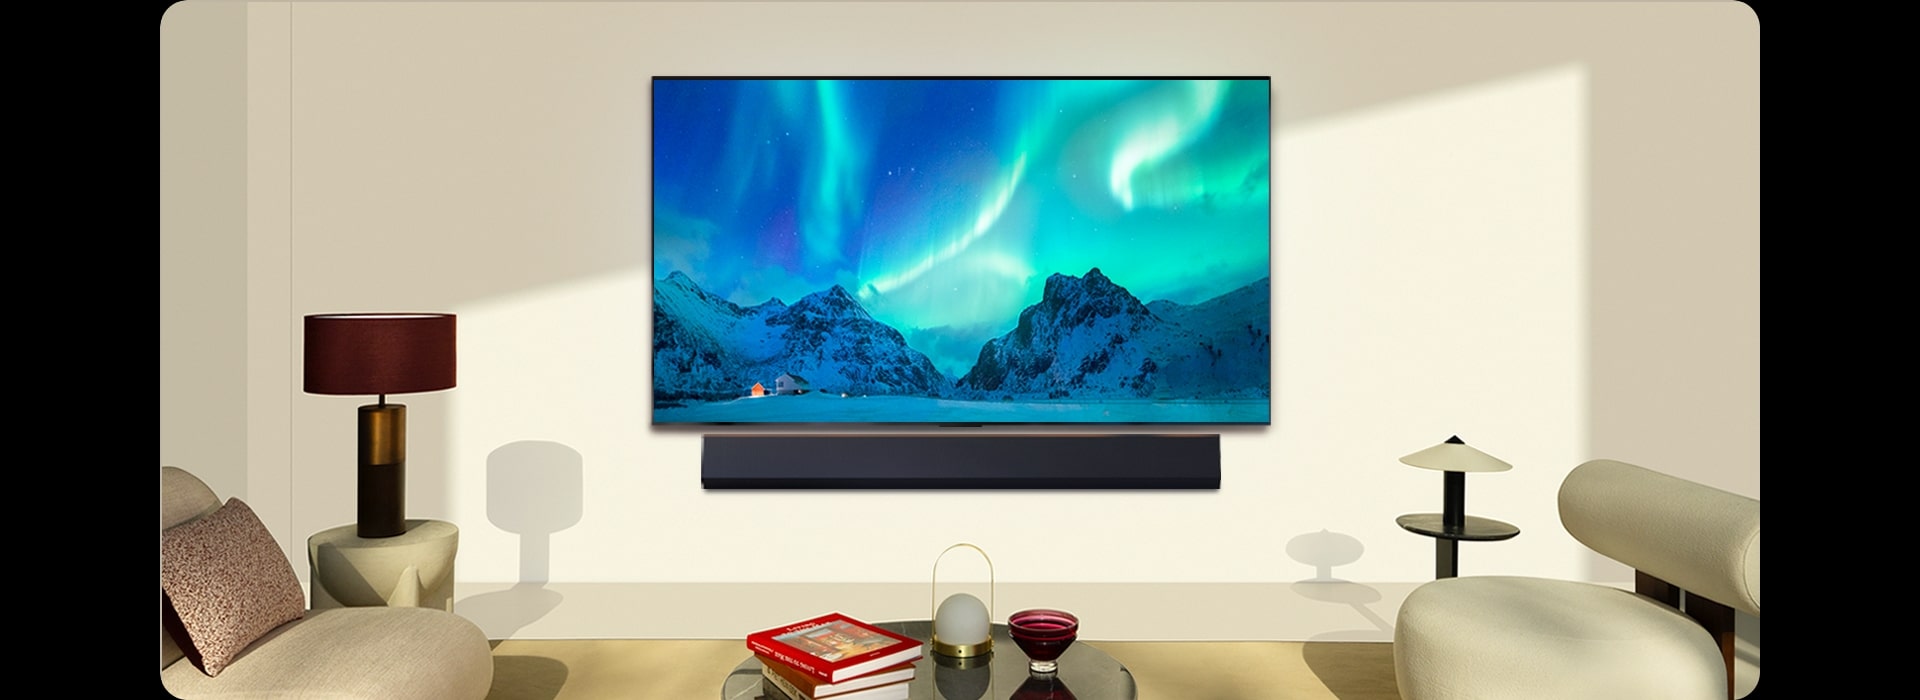 LG OLED TV and LG Soundbar in a modern living space in daytime. The screen image of the aurora borealis is displayed with the ideal brightness levels.